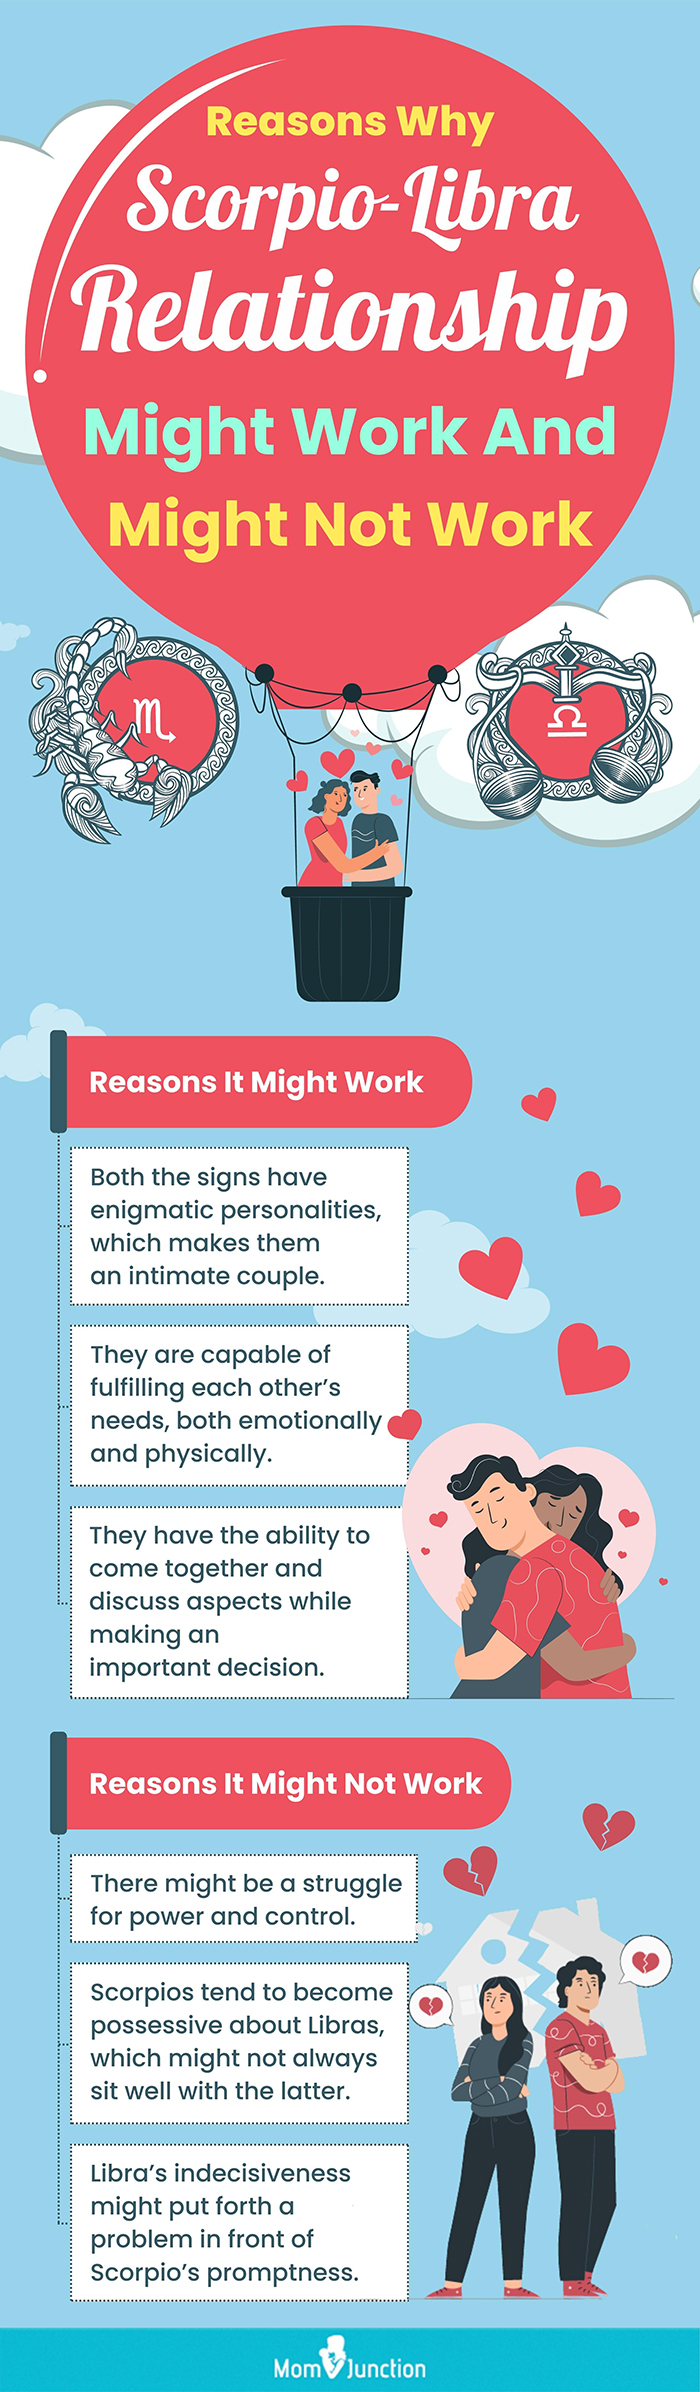 reasons why scorpio libra relationship might work and might not work (infographic)